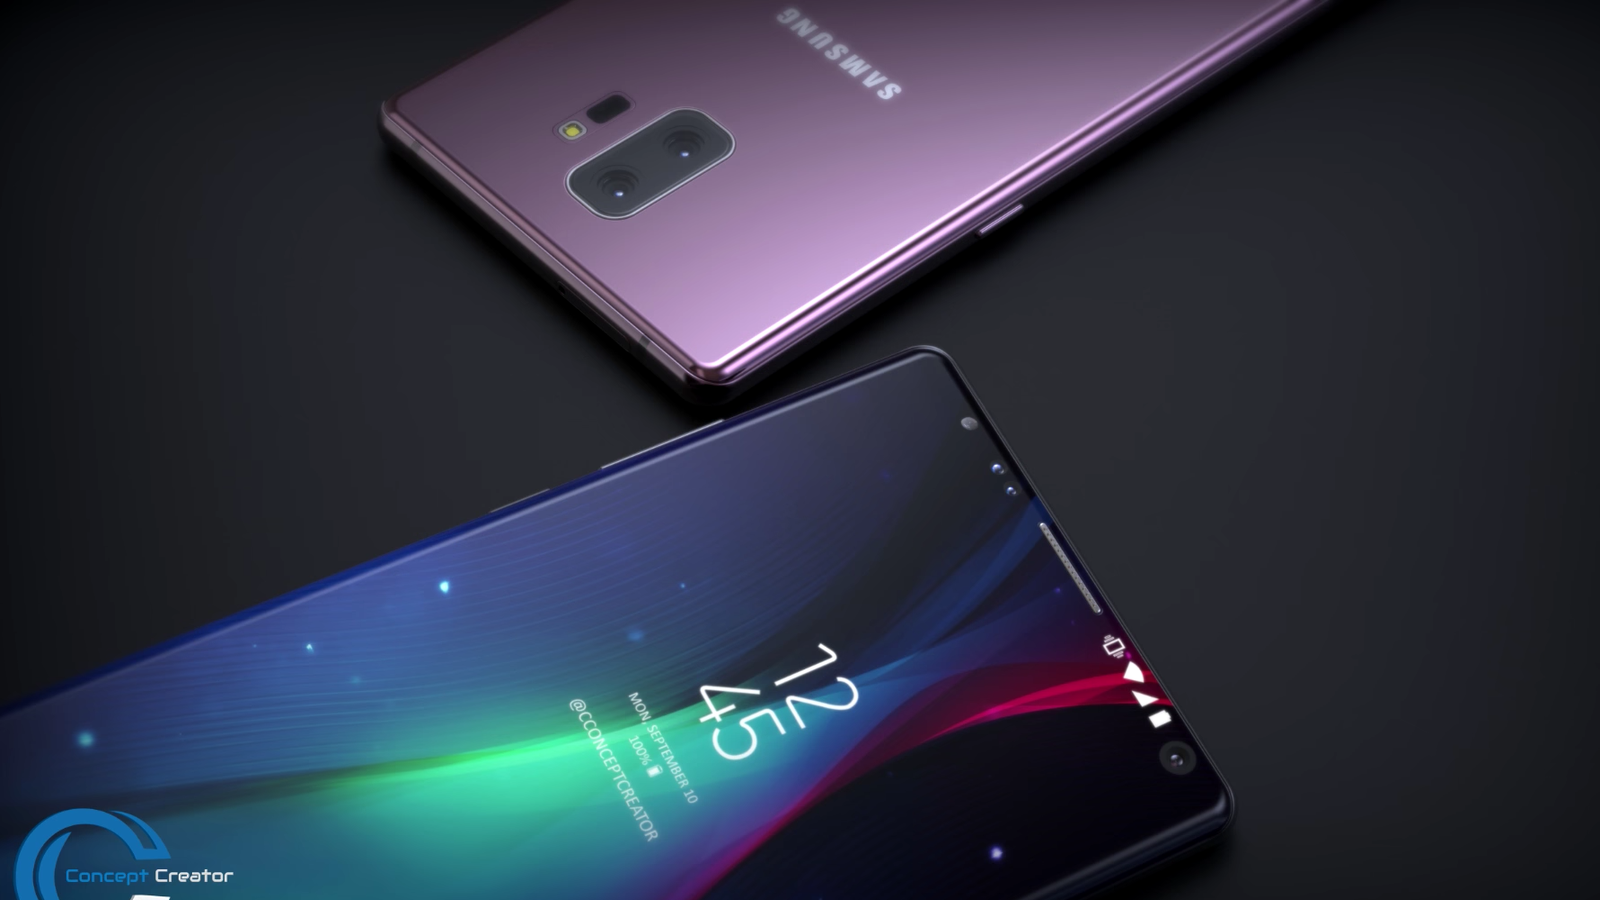 Samsung Galaxy Note 9 Specs, Size, Colors, Processors and Price